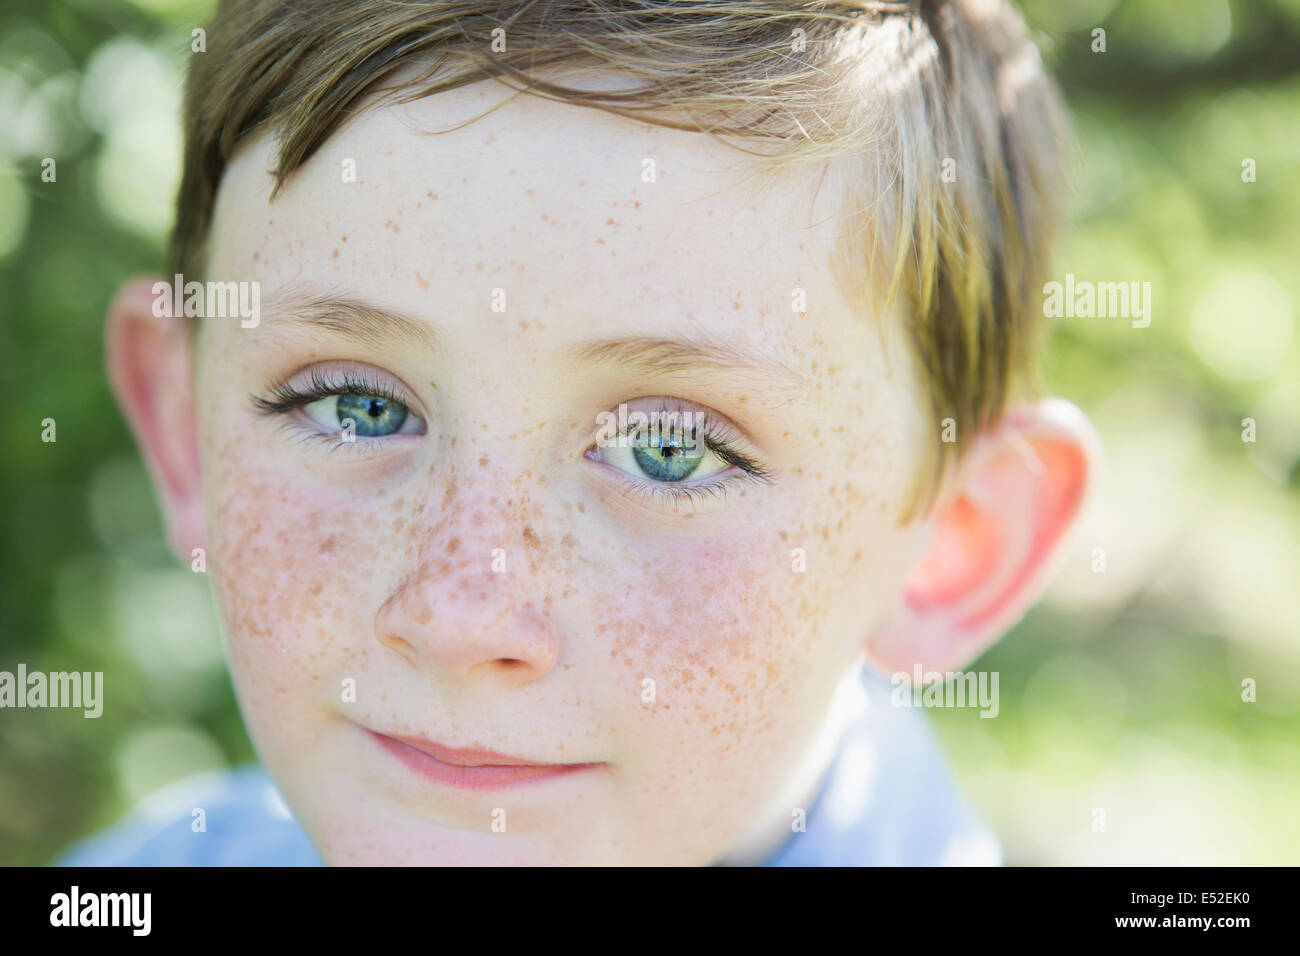 Portrait of a young boy with red hair, blue eyes and freckles on his nose. Stock Photo